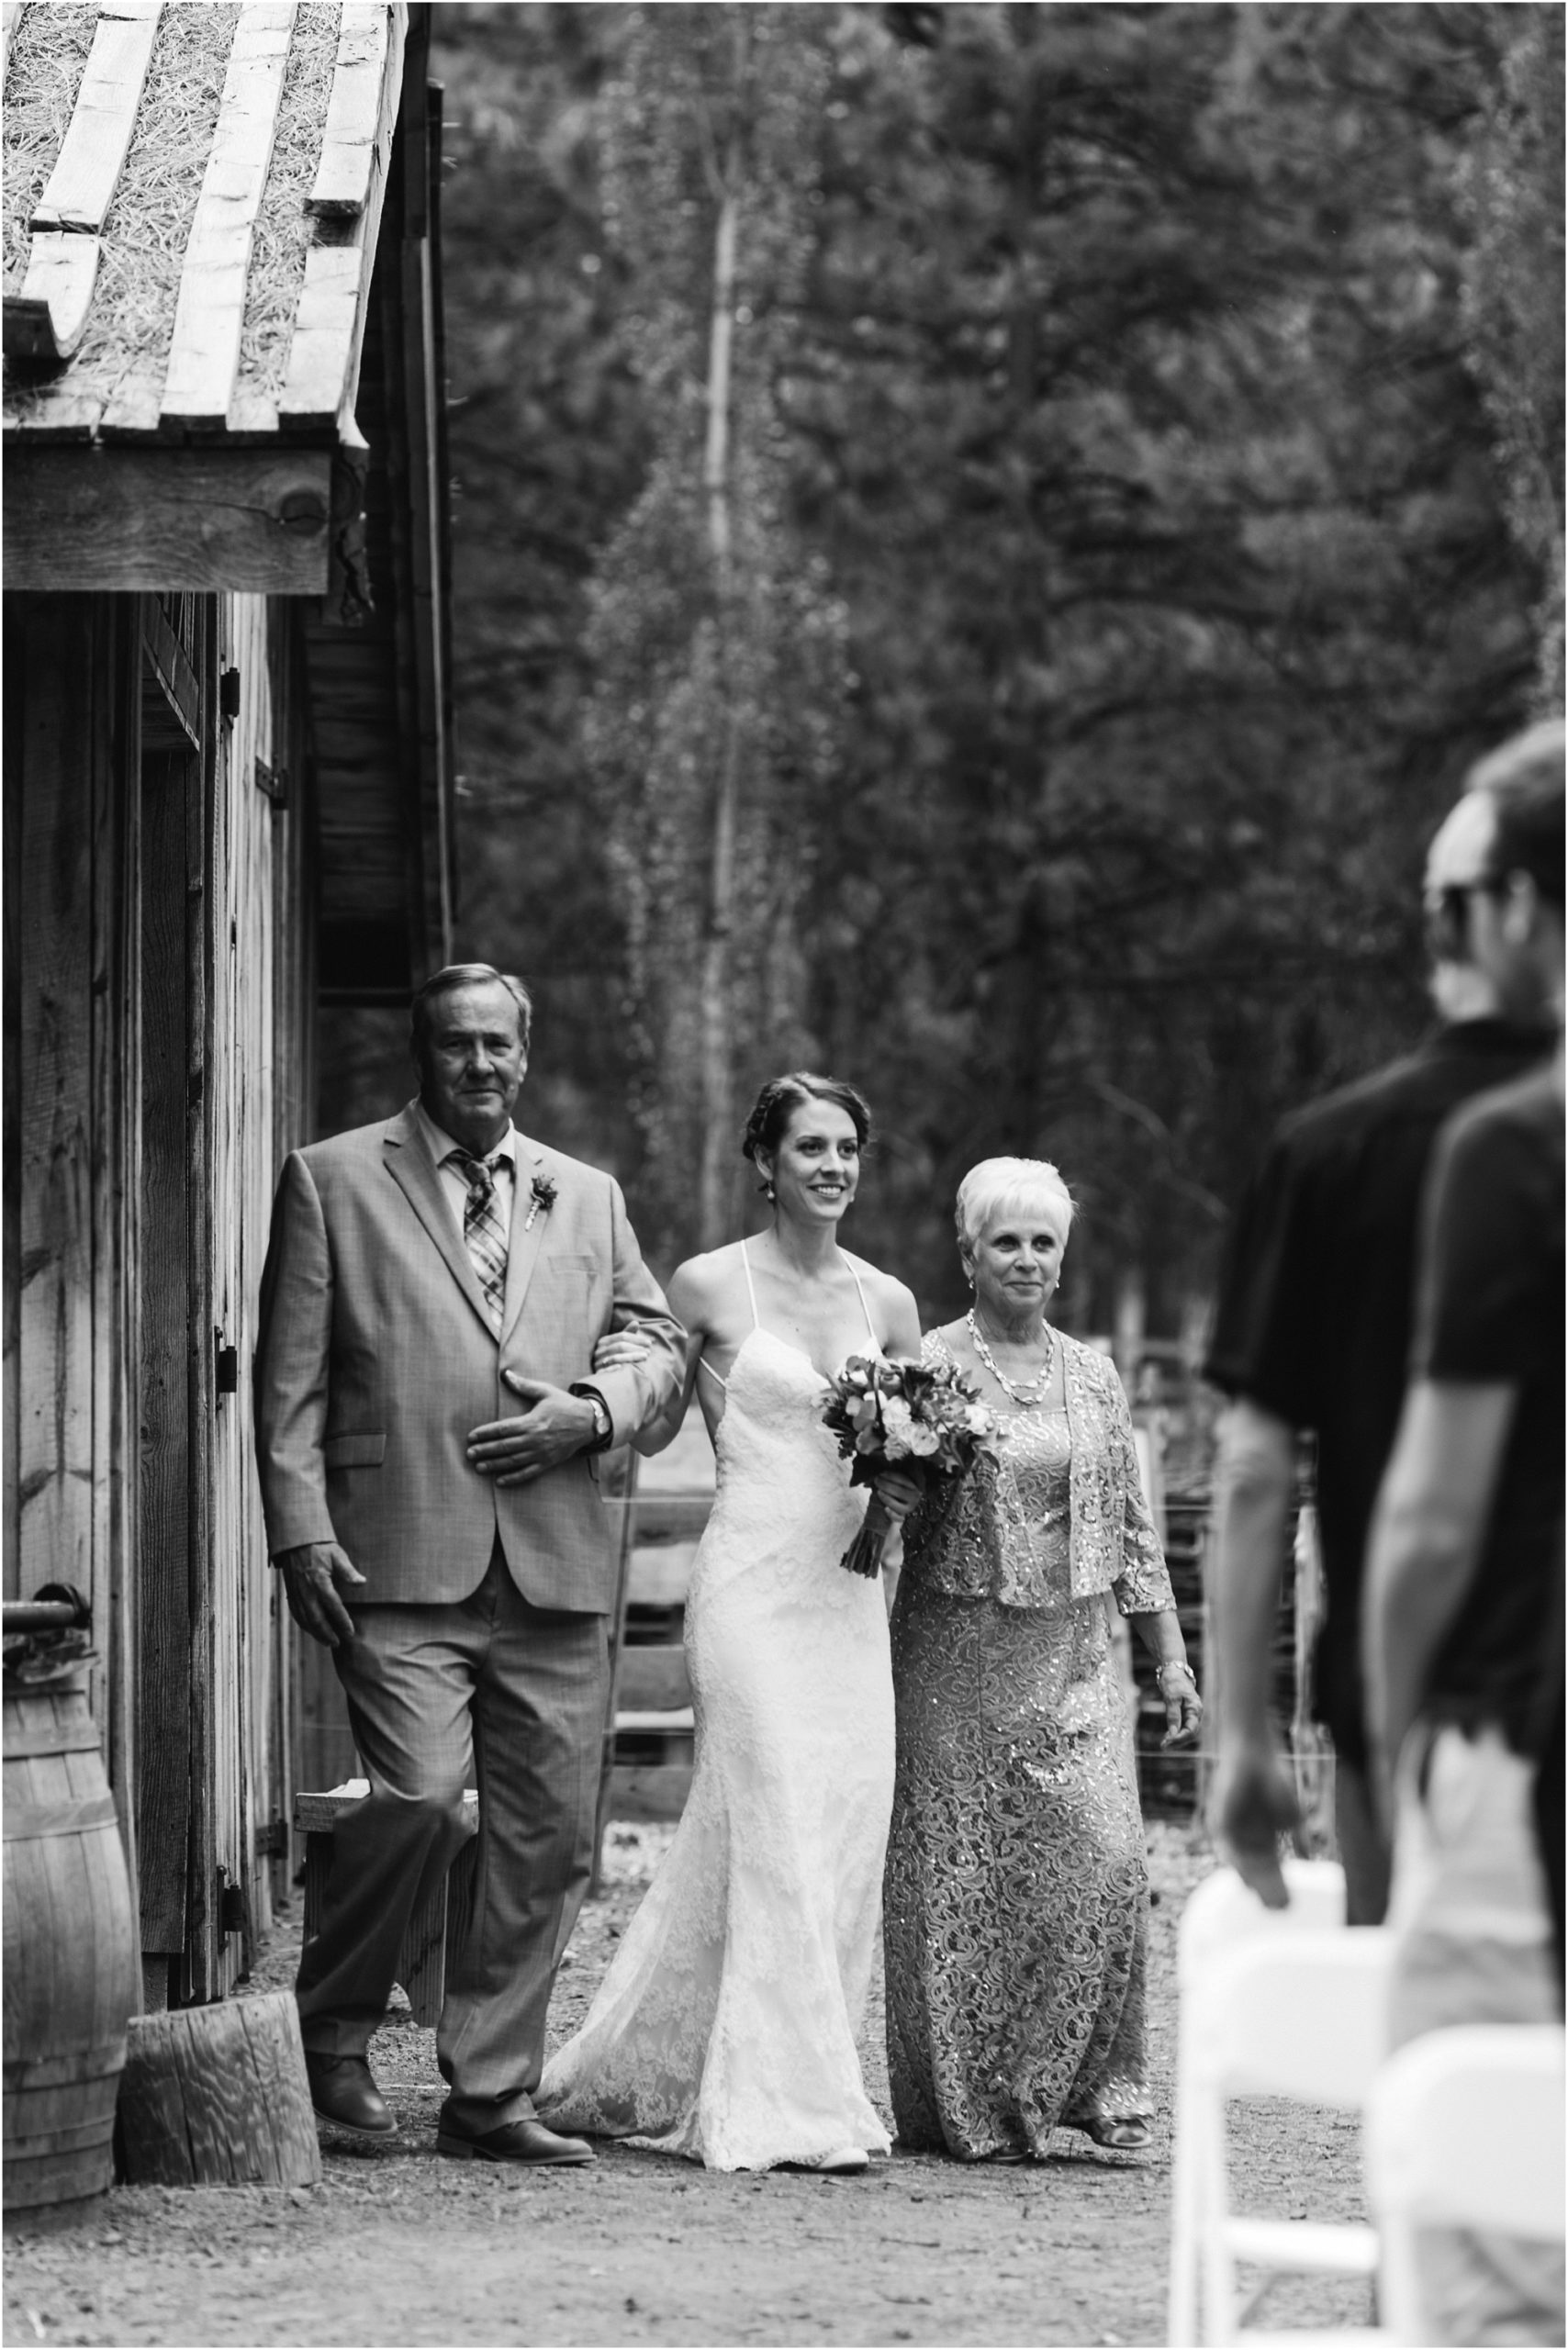 The bride, wearing a strappy BHLDN gown, is escorted by her parents down the dirt aisle at her rustic outdoor wedding at Bend, Oregon's High Desert Museum. | Erica Swantek Photography